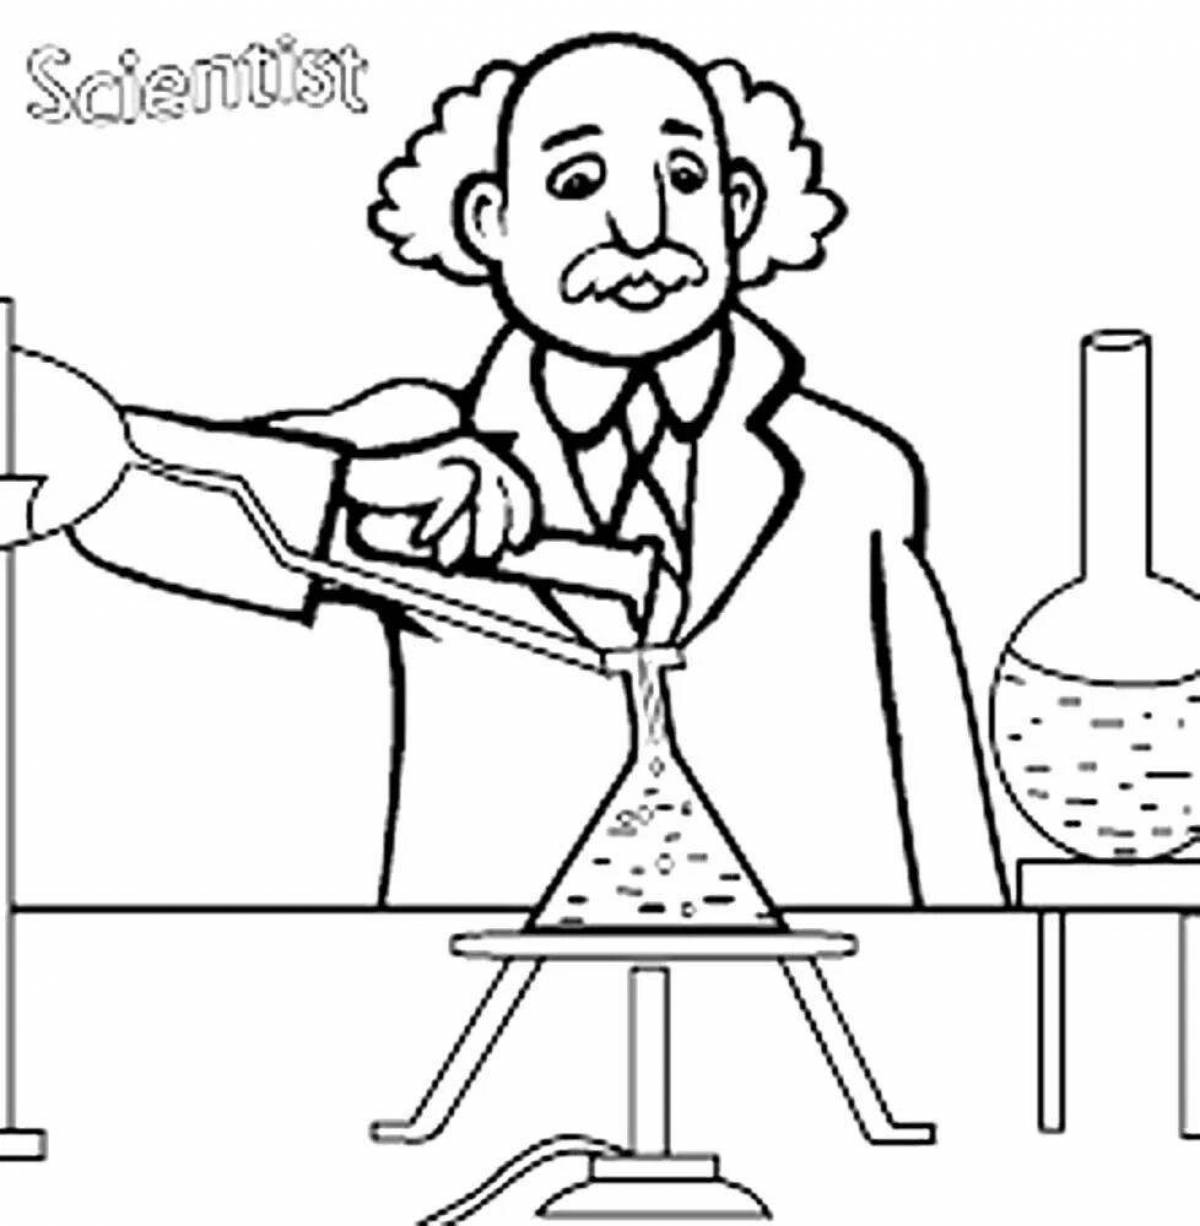 Colourful coloring scientists for children